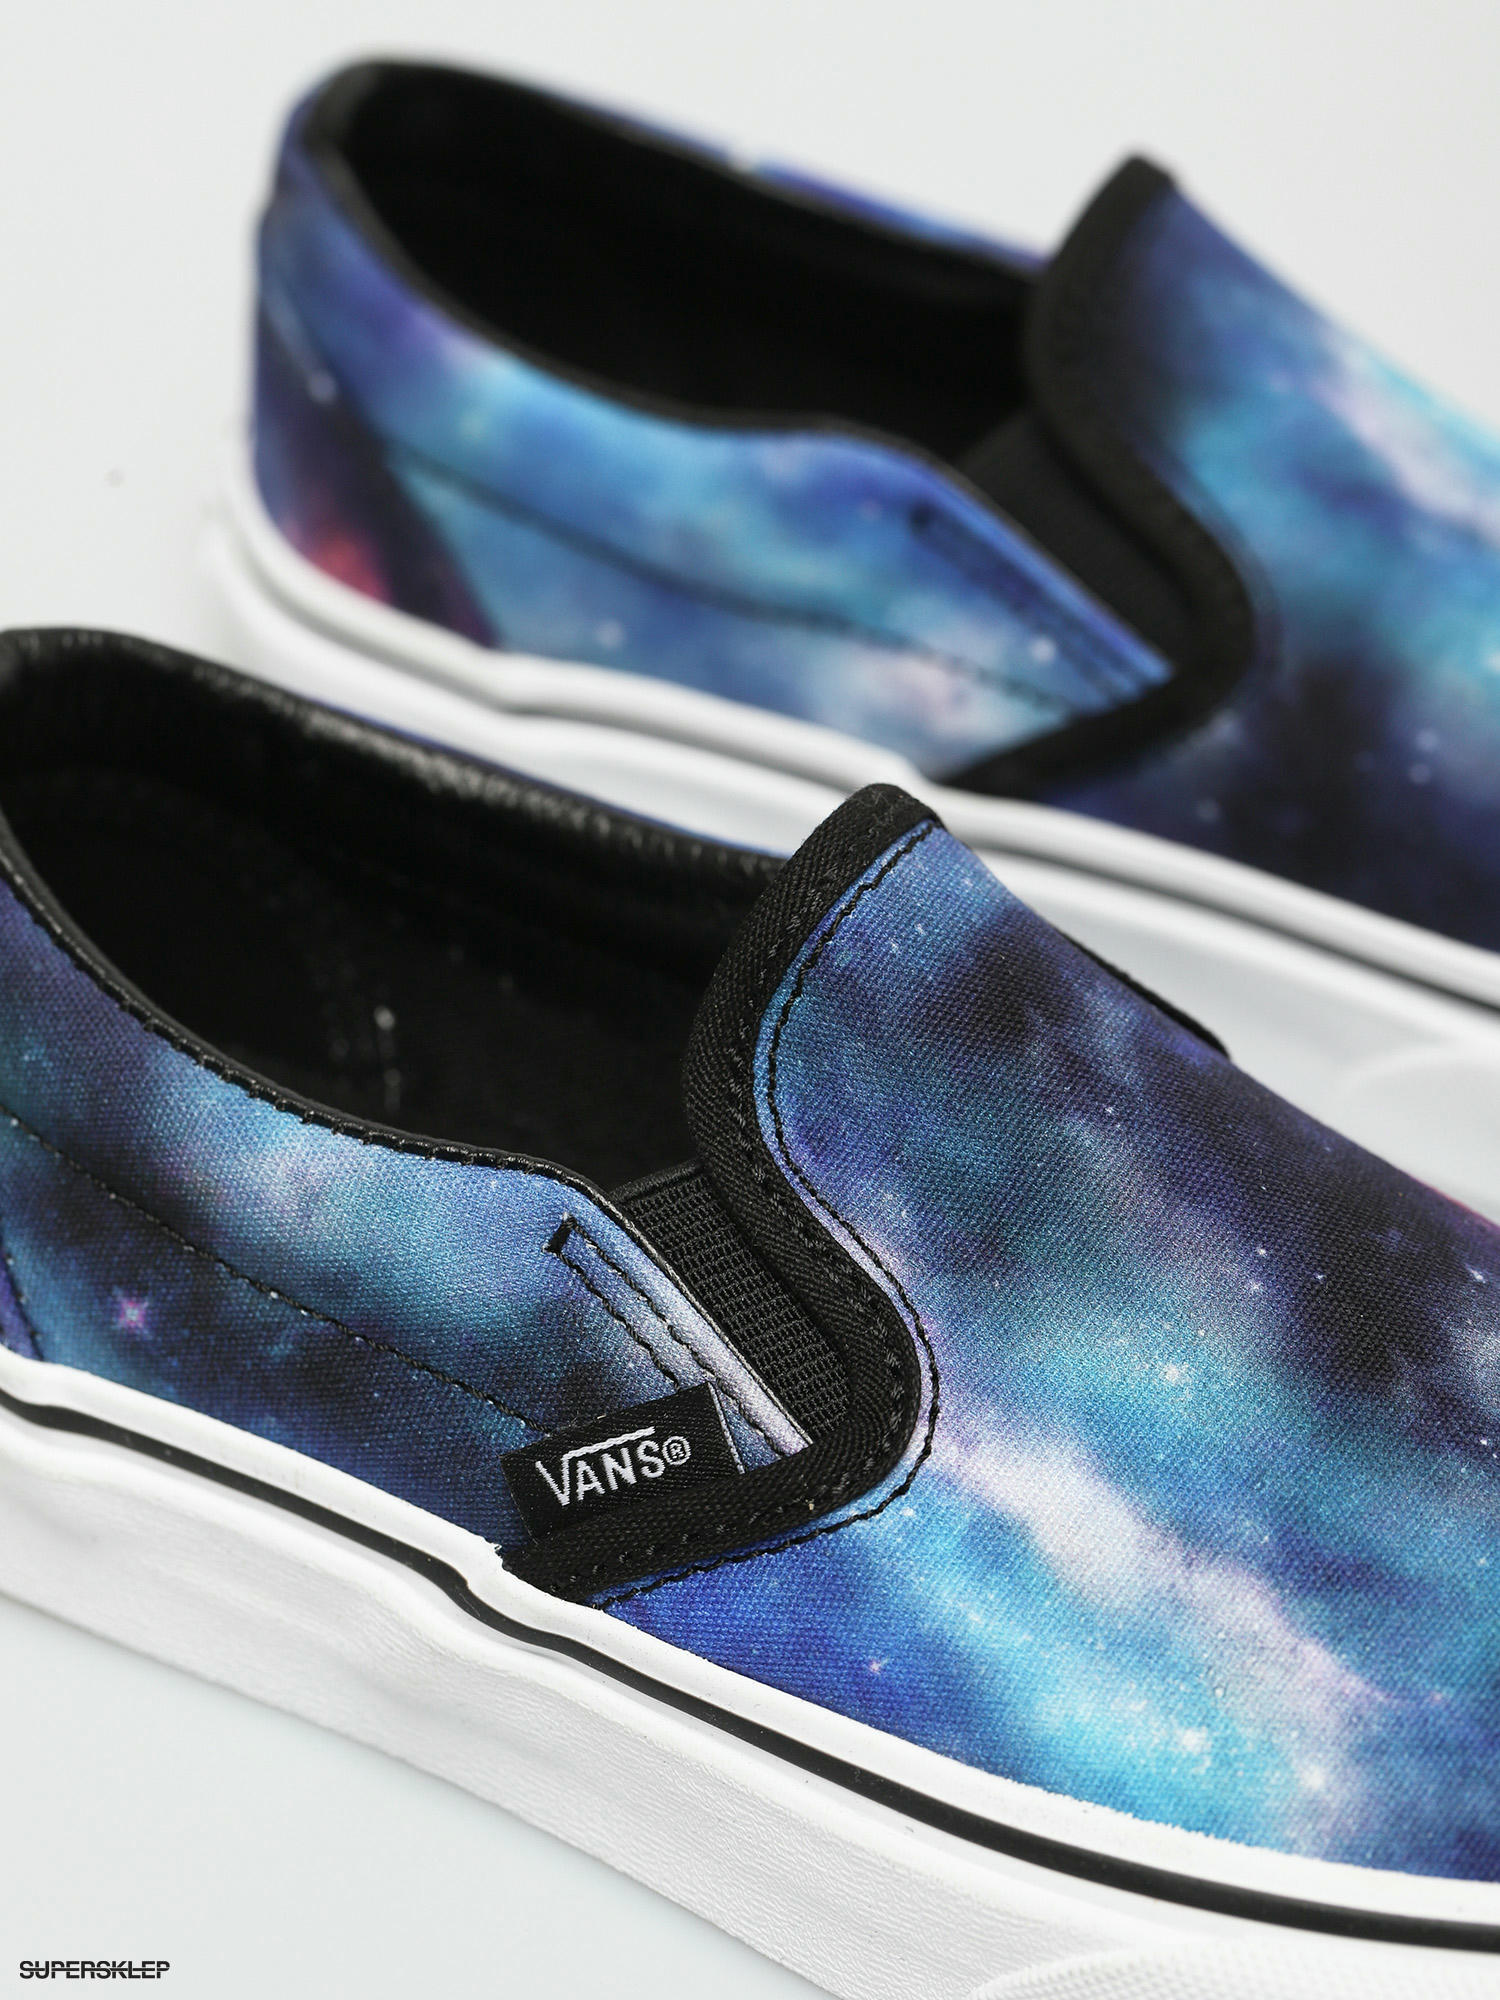 Want to present day naked Boty Vans Classic Slip On (galaxy black/true white)